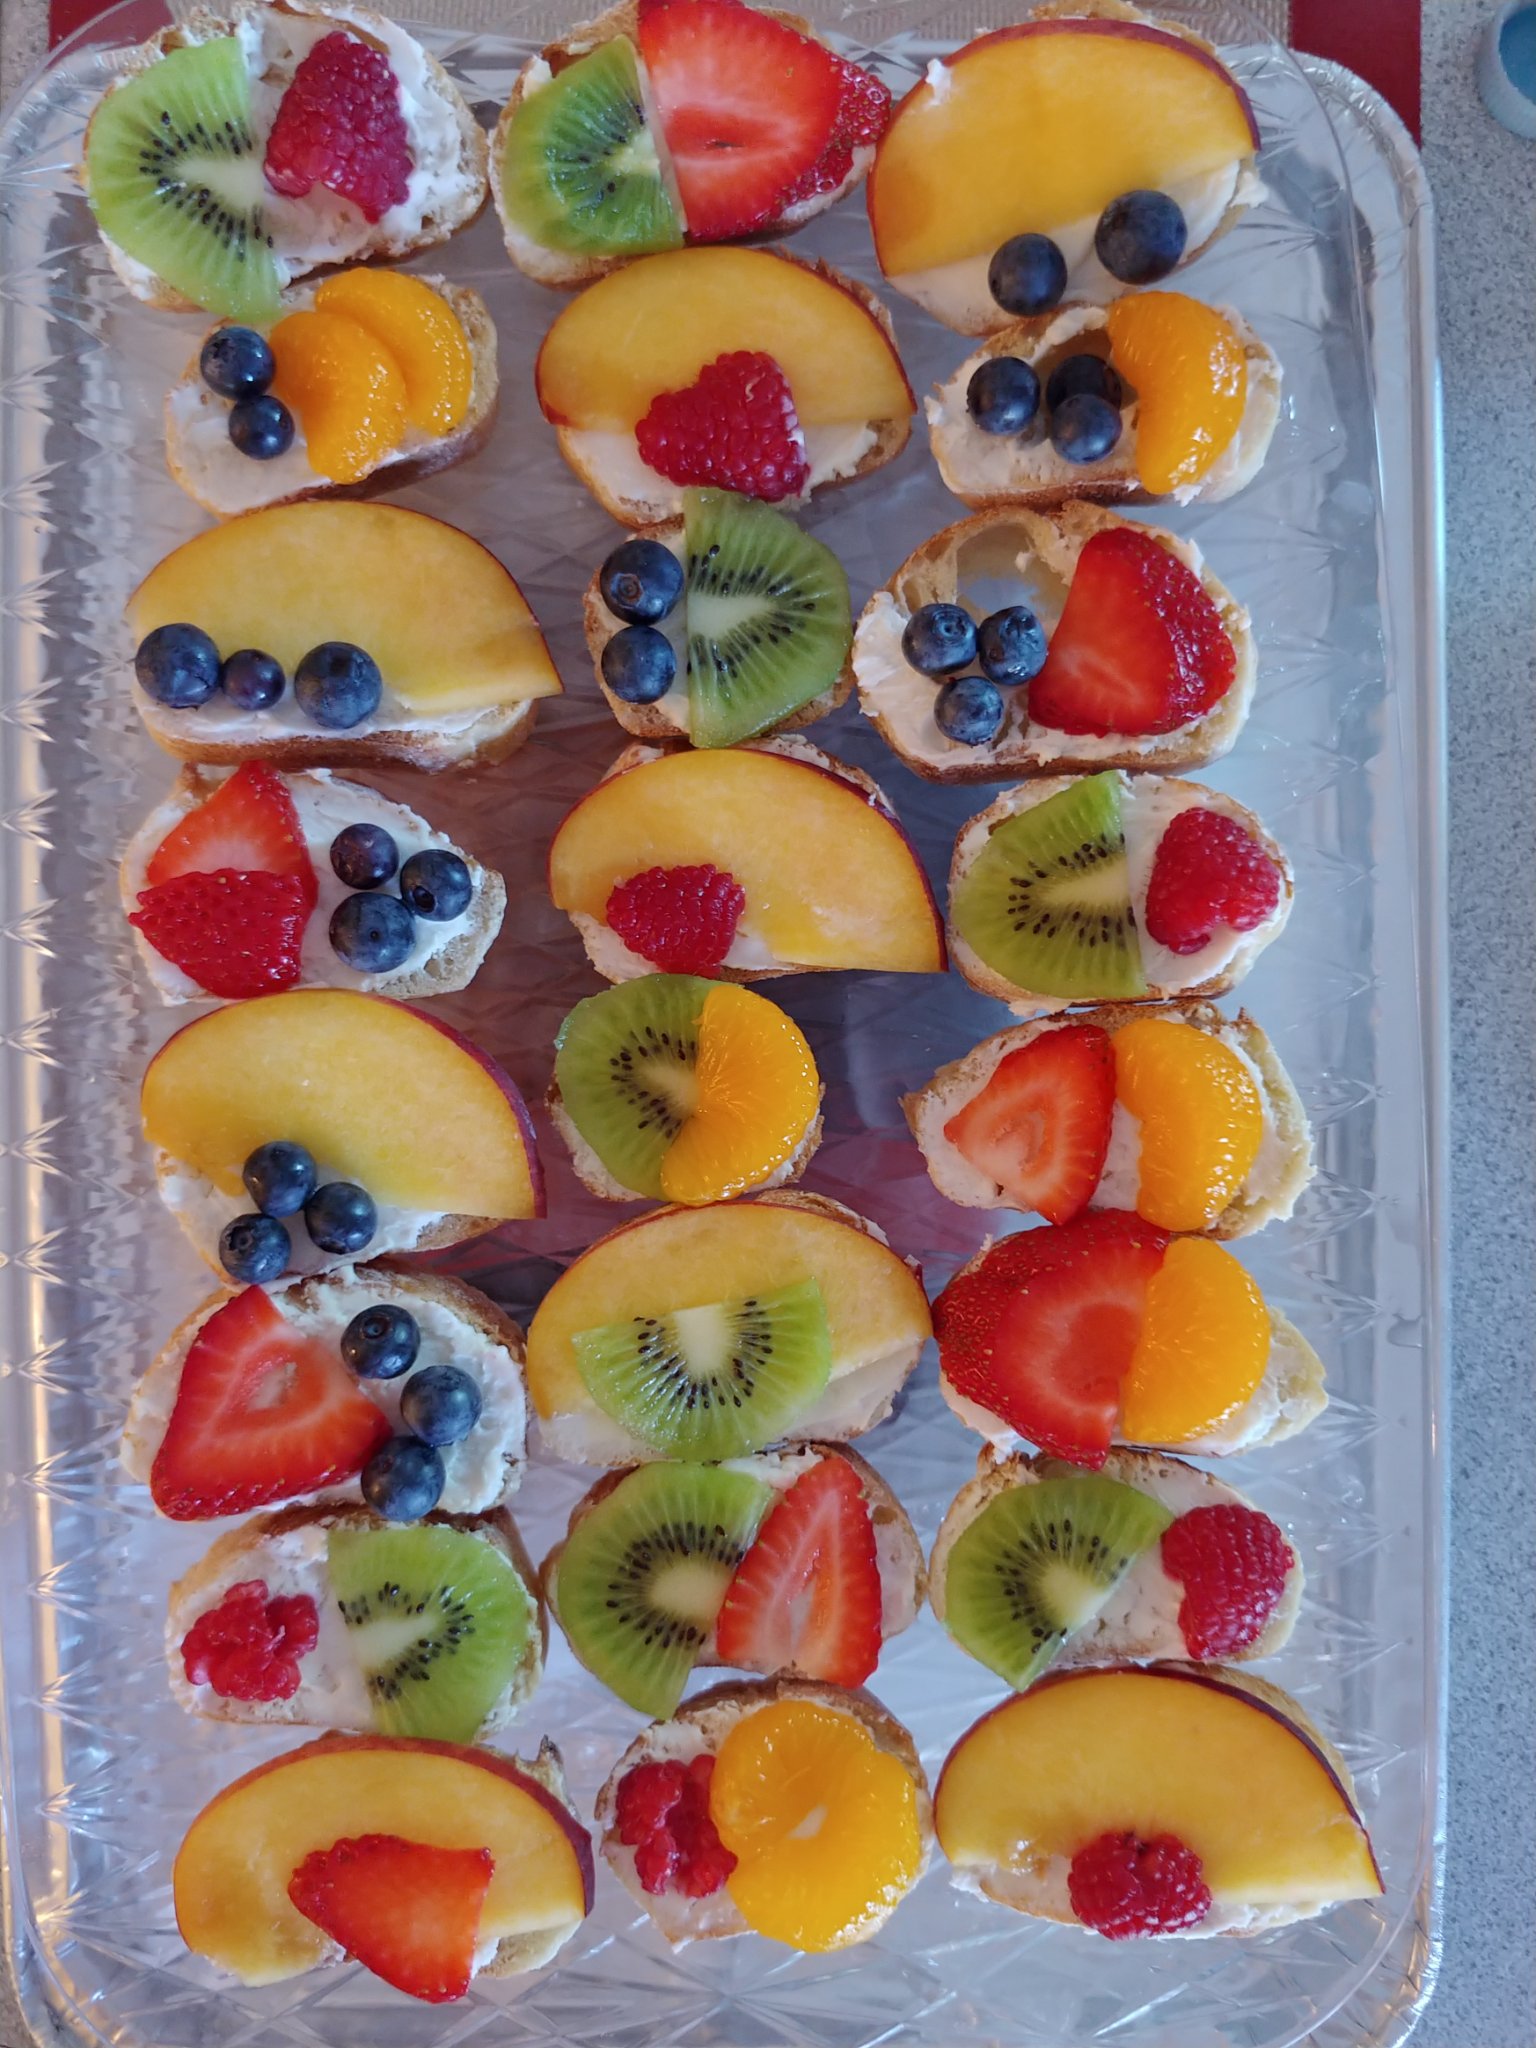 Goat Cheese Crostini with Honey and Fruit